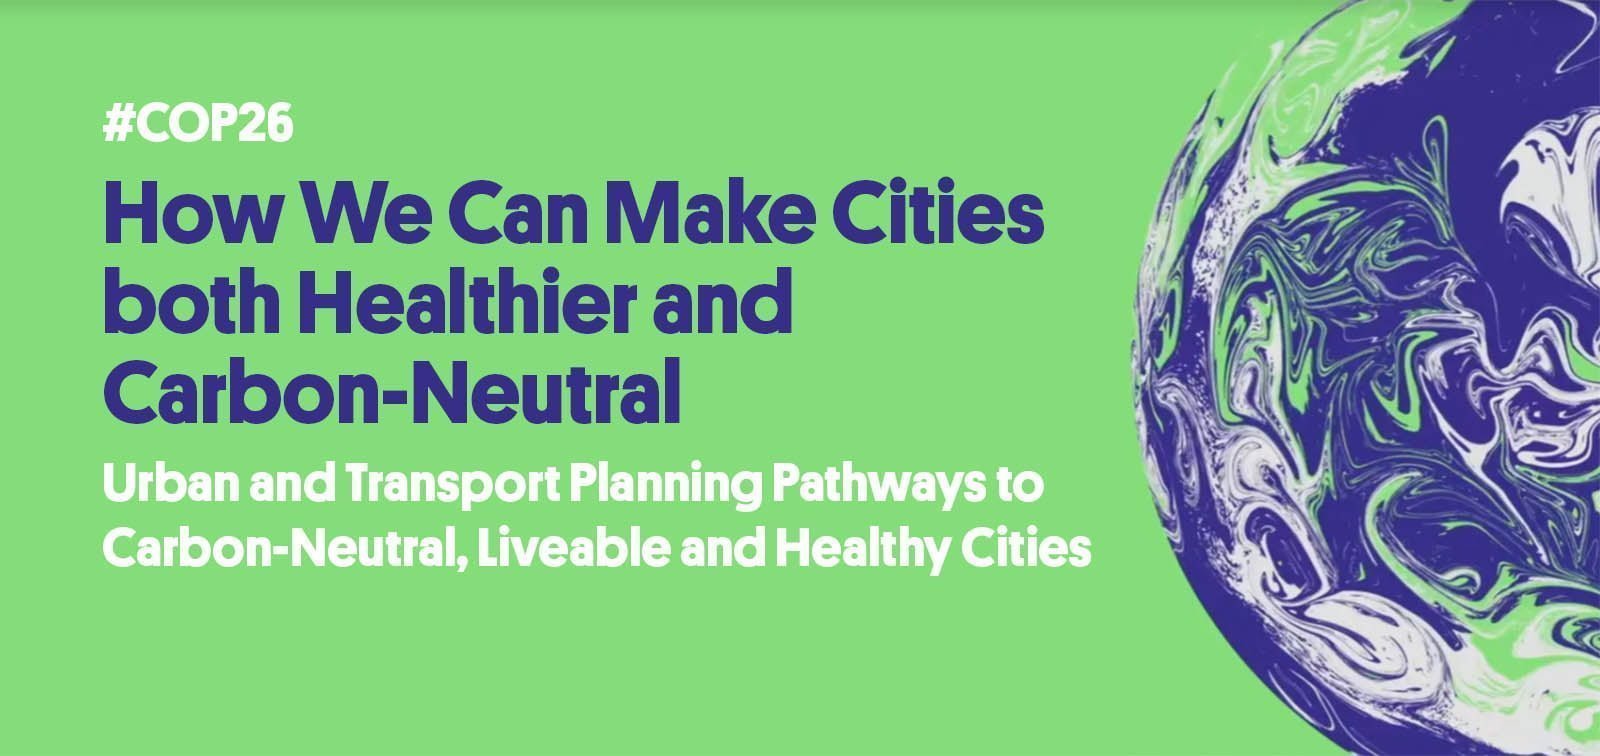 COP26 Side event: How We Can Make Cities both Healthier and Carbon-Neutral